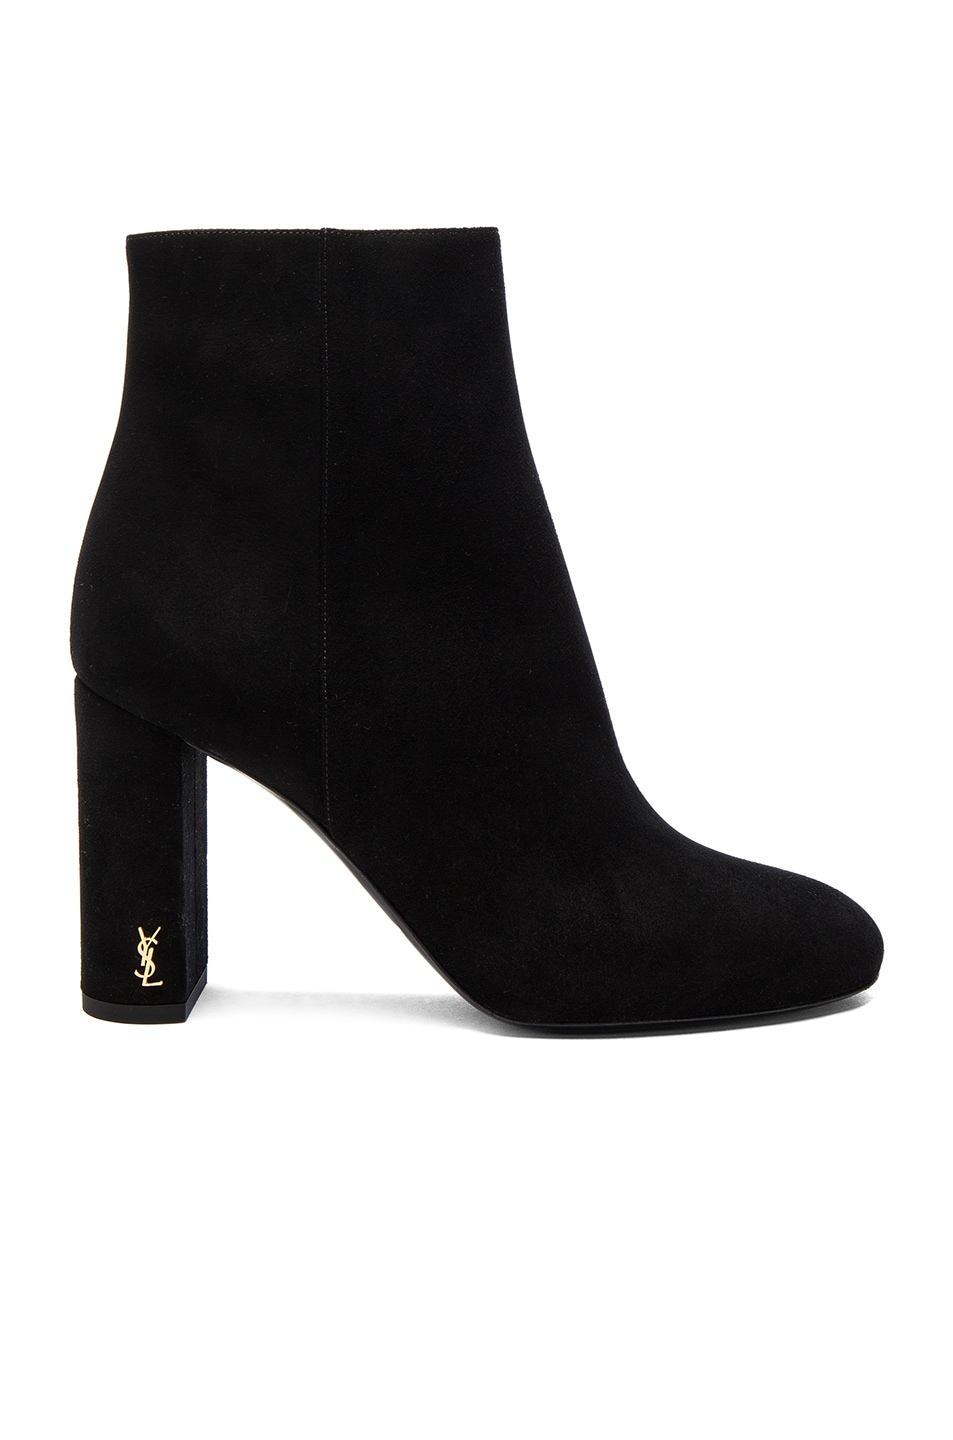 Image 1 of Saint Laurent Loulou Suede Boots in Black